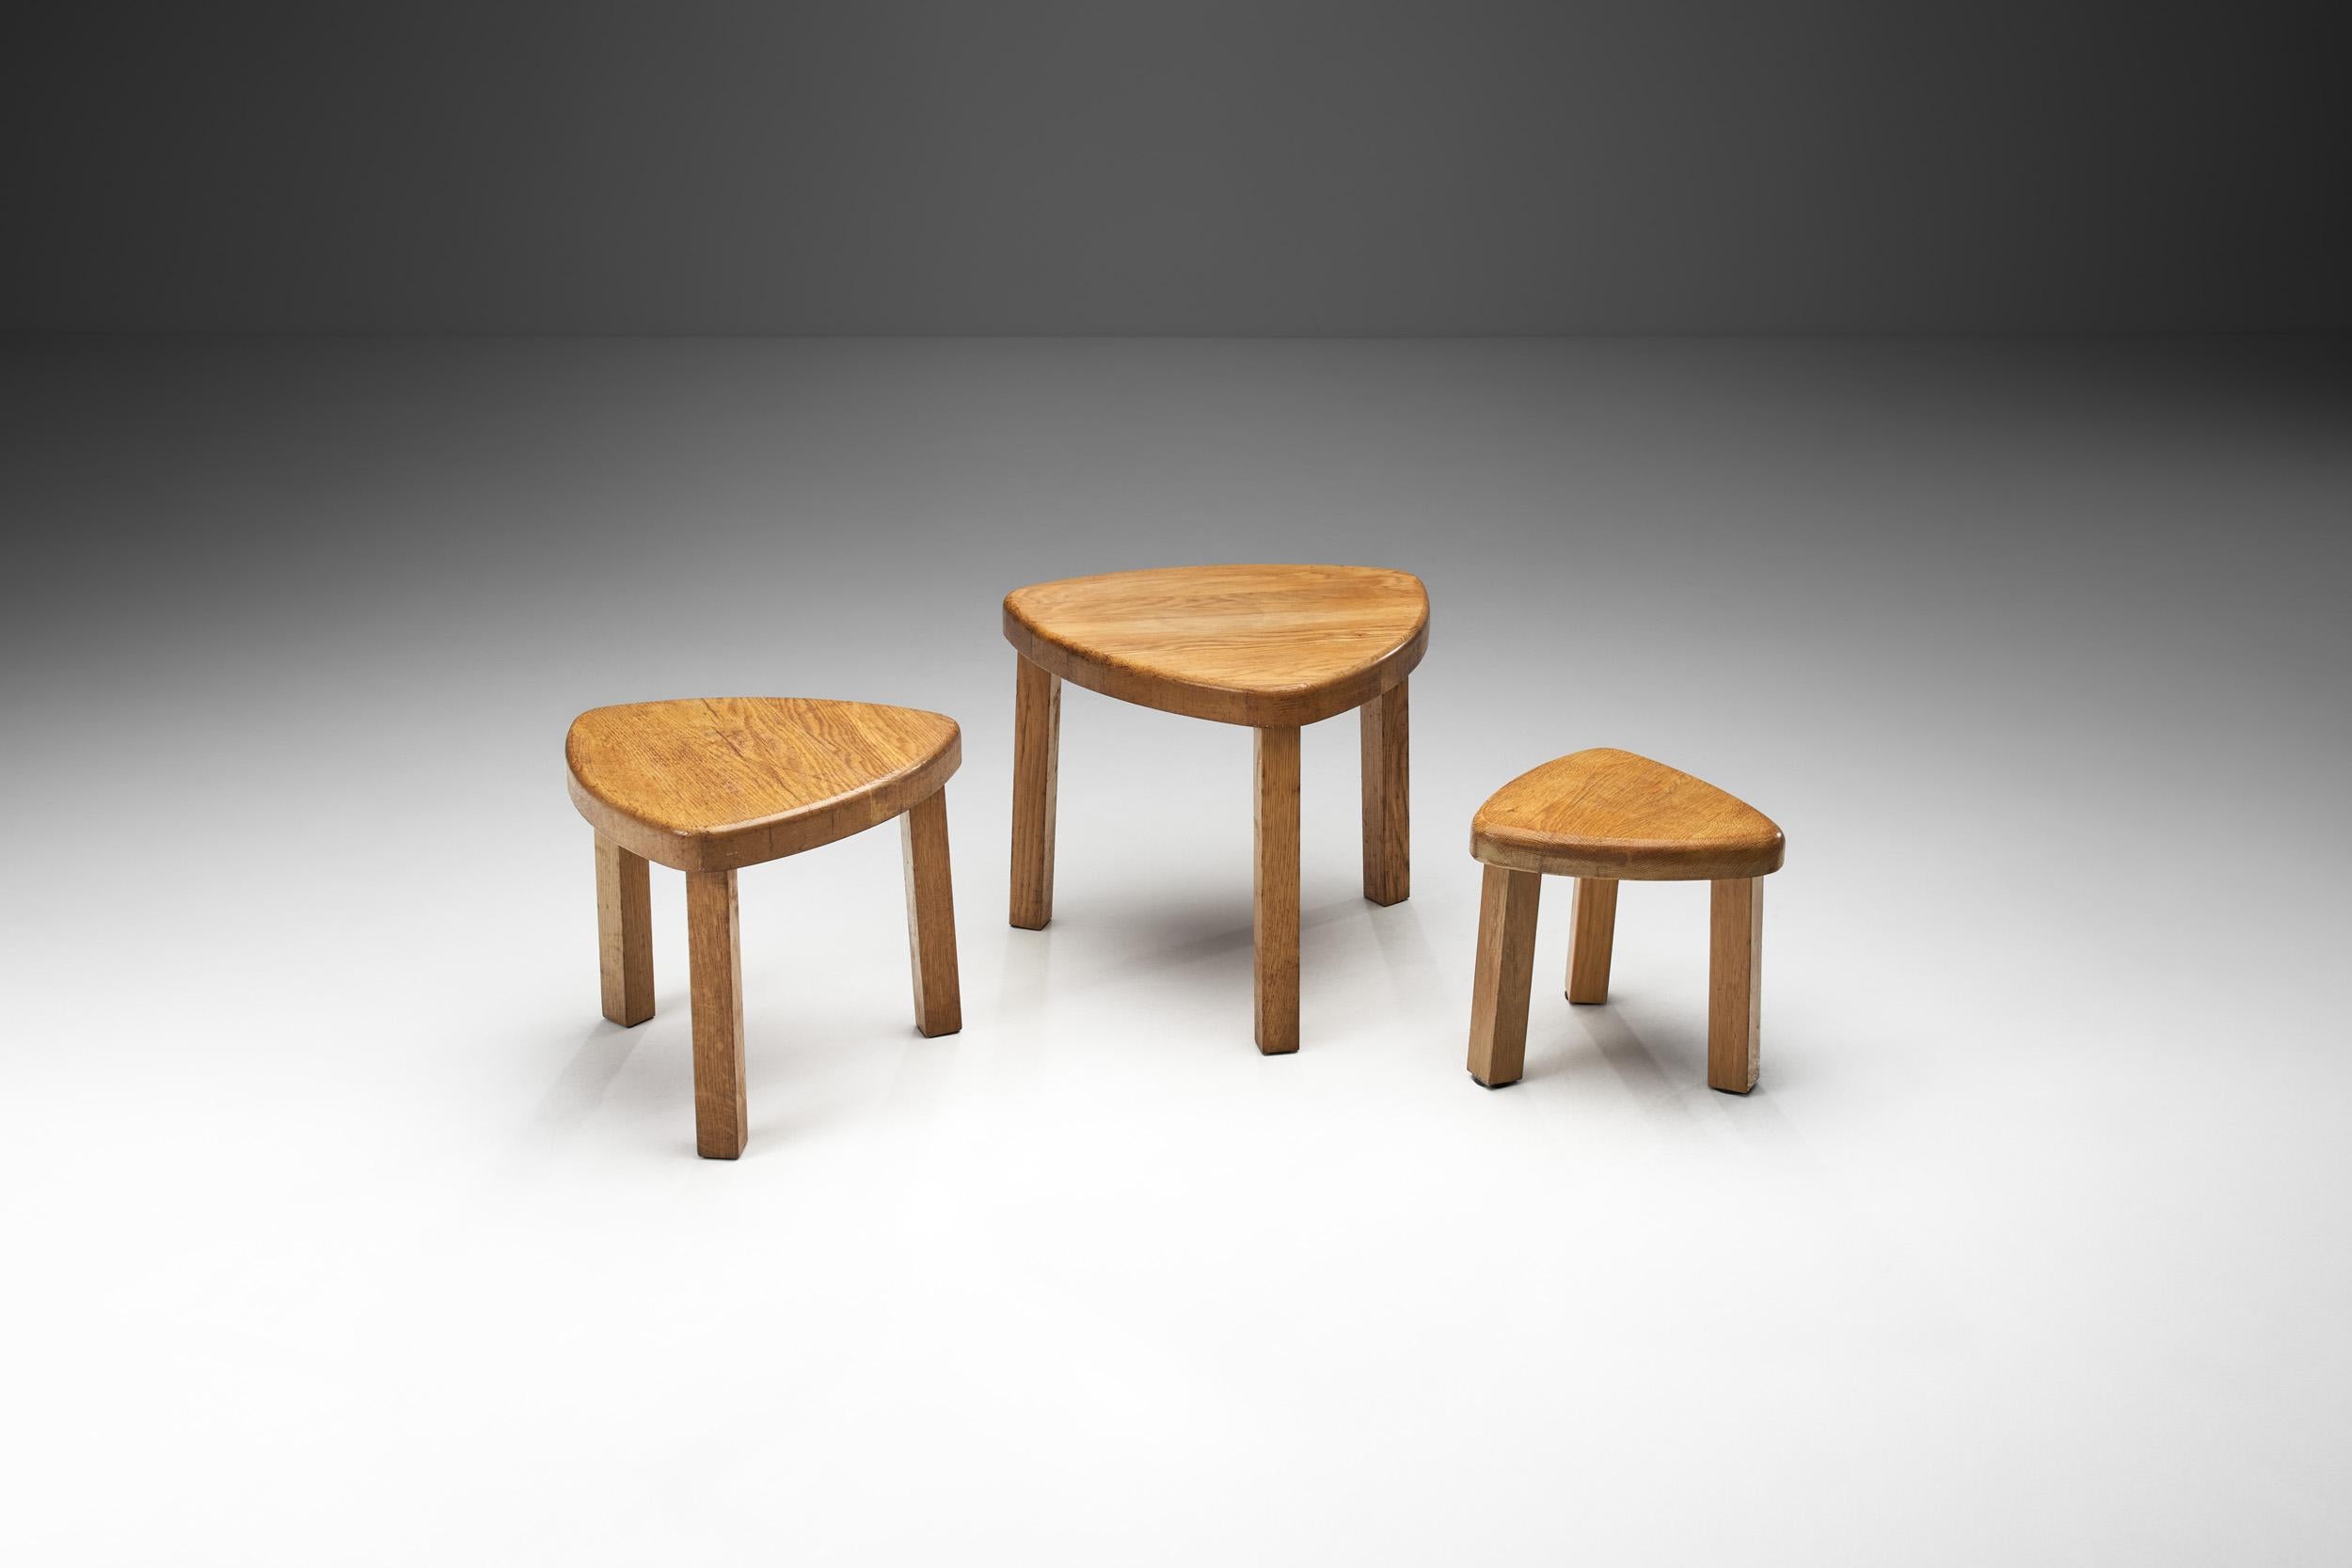 Late 20th Century Scandinavian Solid Wood Nesting Tables, Scandinavia ca 1970s For Sale